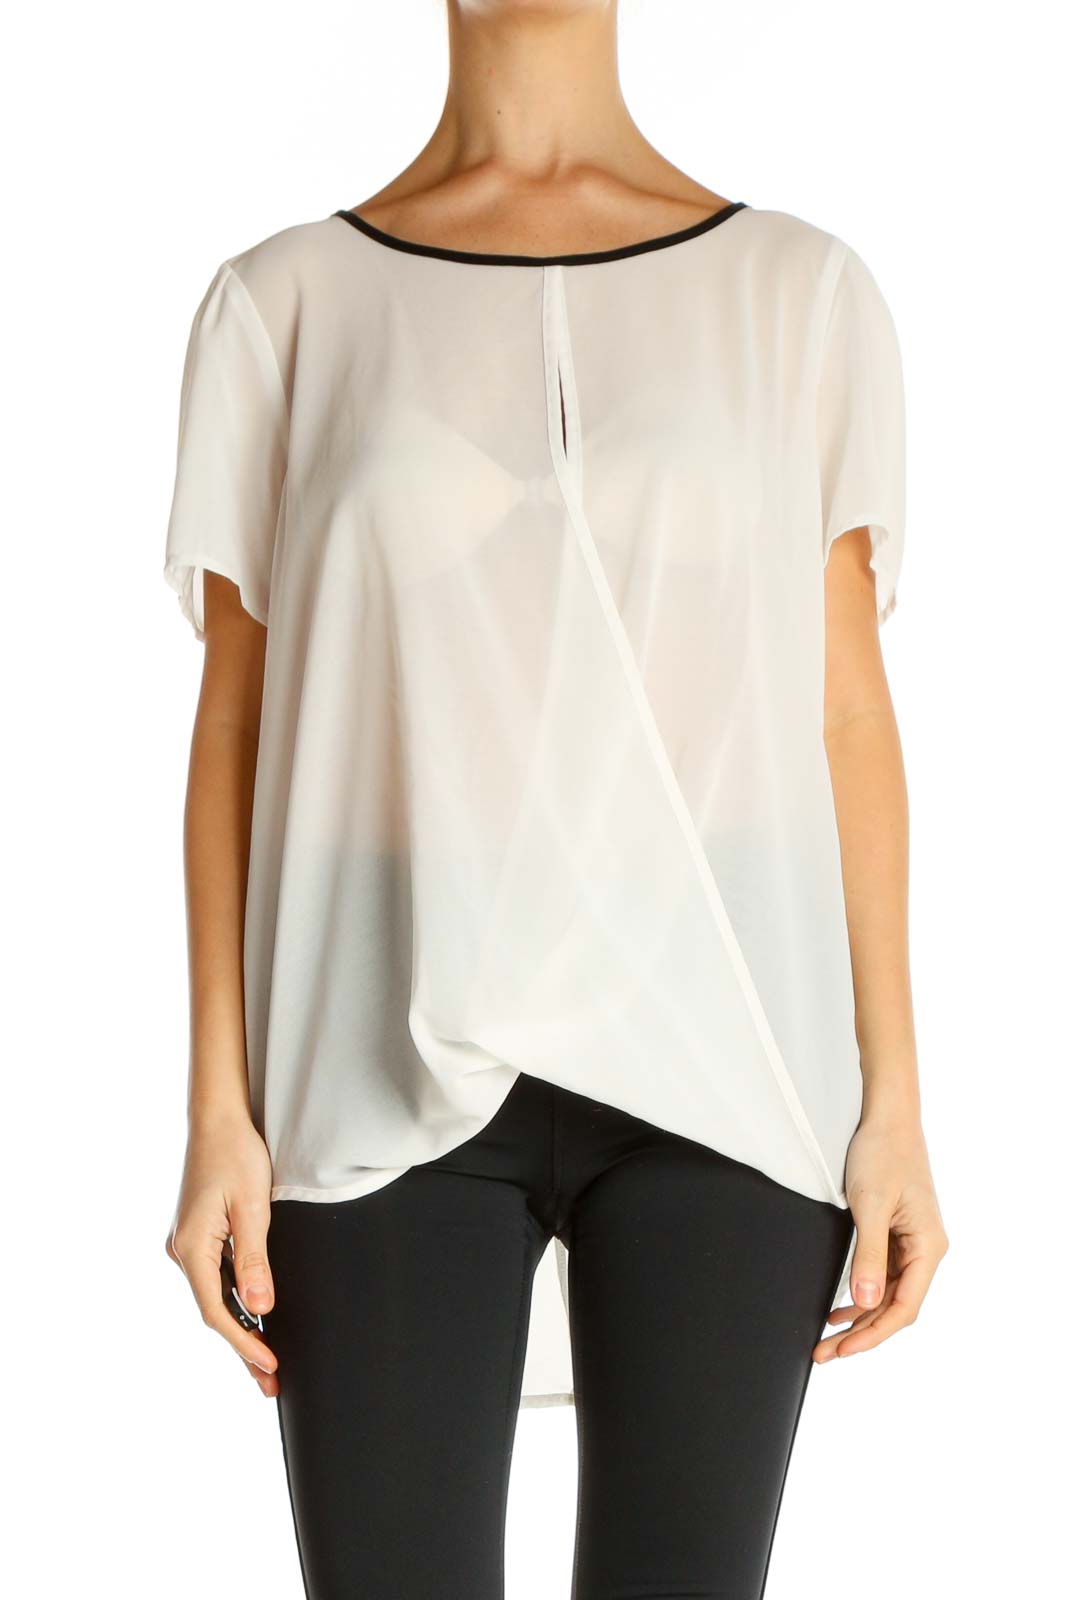 Beige Solid All Day Wear T-Shirt Front